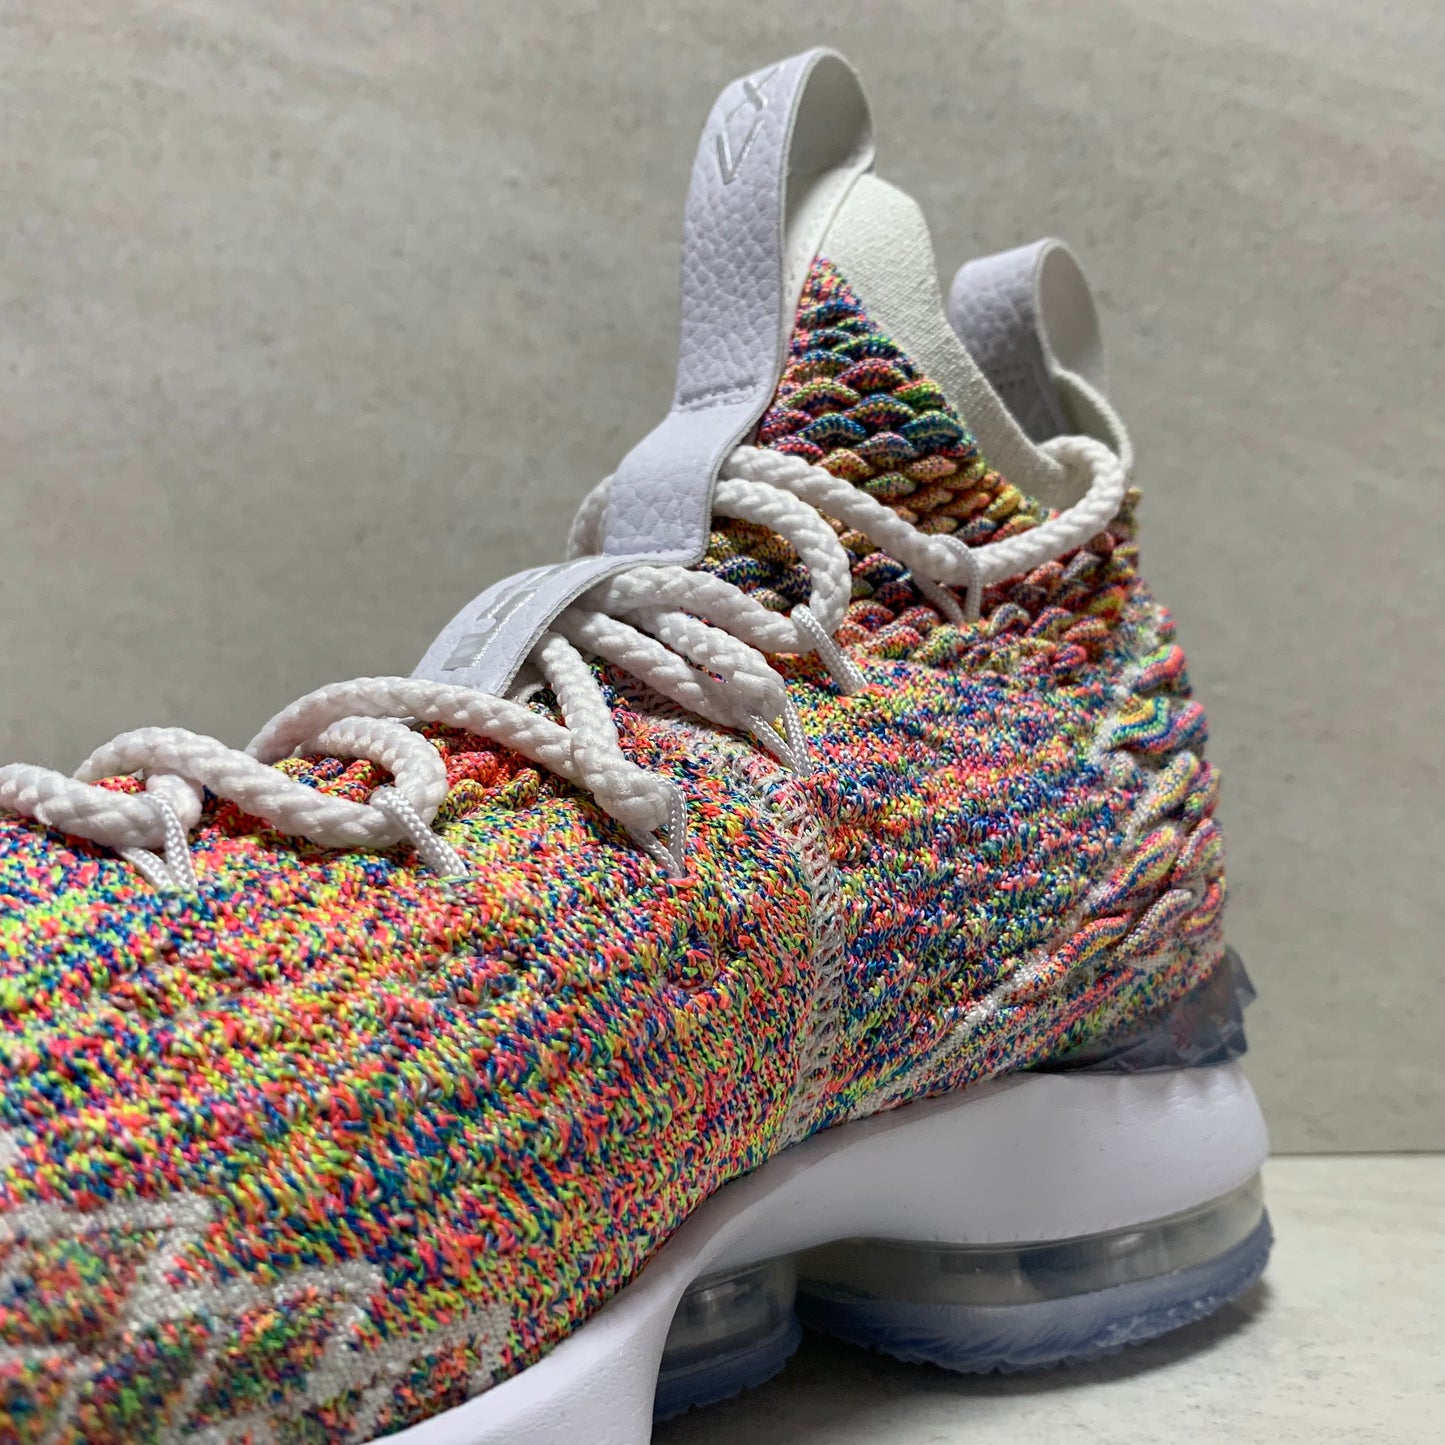 NIKE LEBRON 15 XV GALETS FRUITÉS GS TAILLE 5.5Y 922811-900